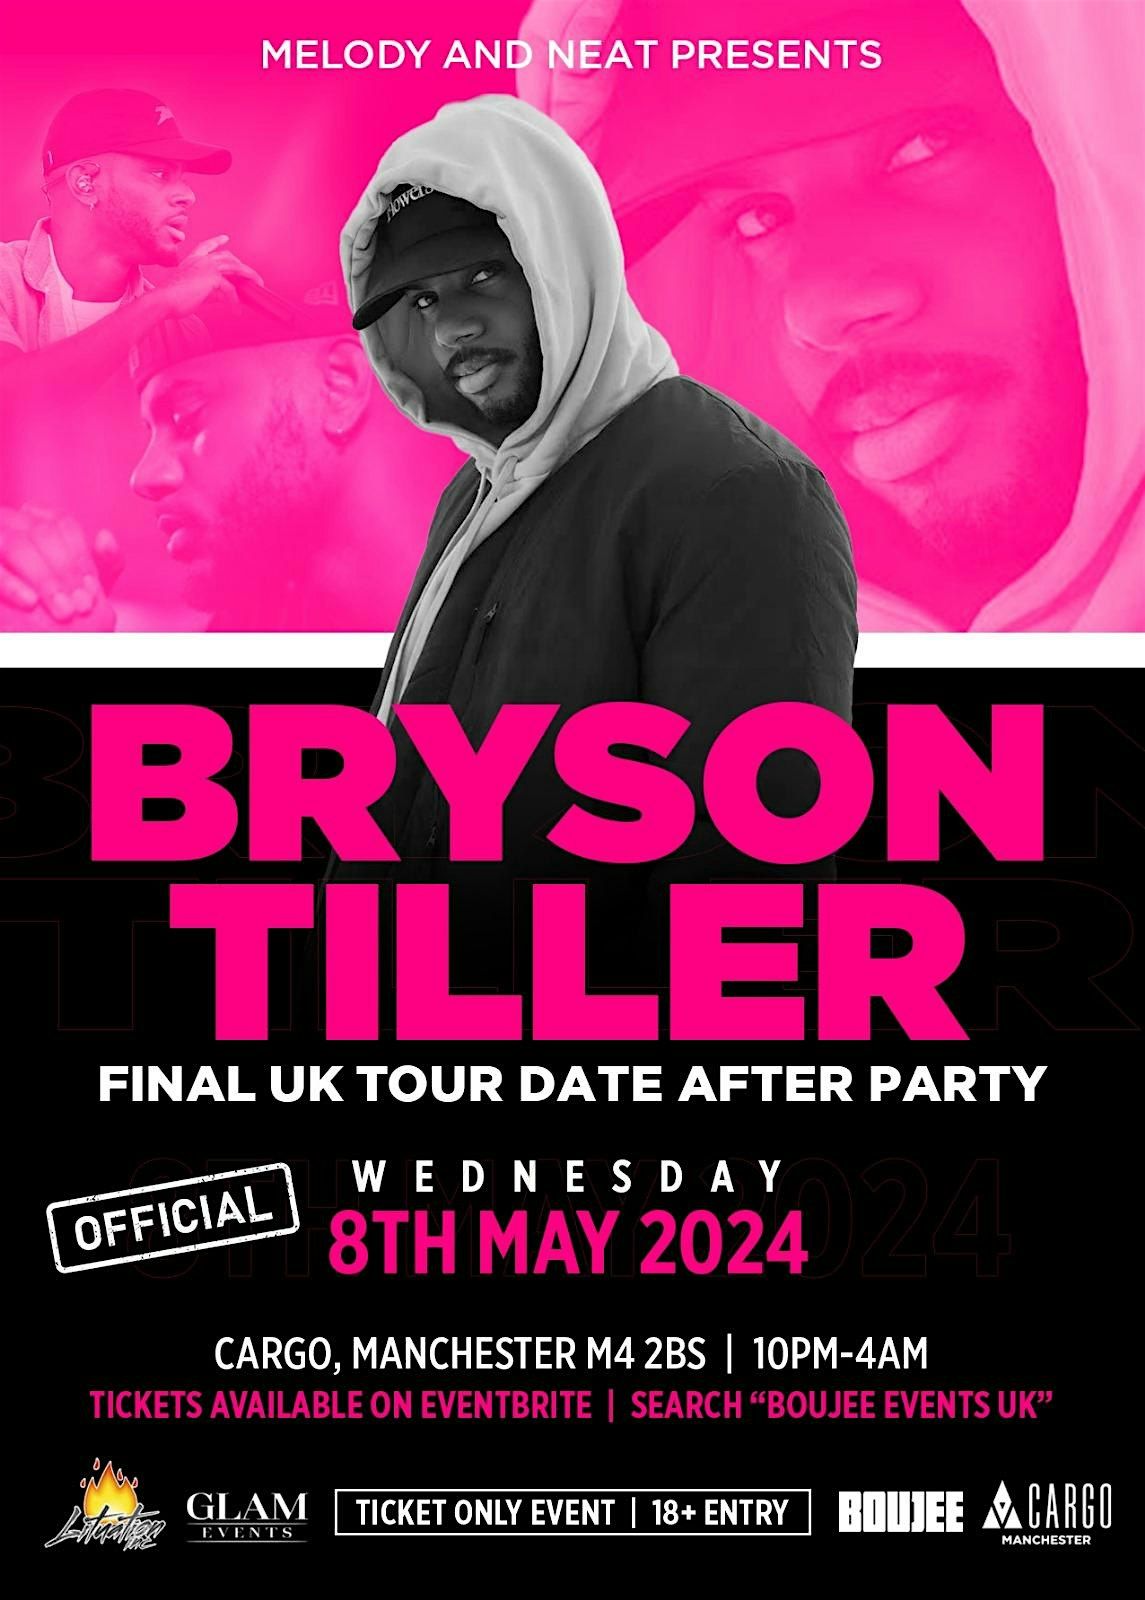 Bryson Tiller OFFICIAL after party